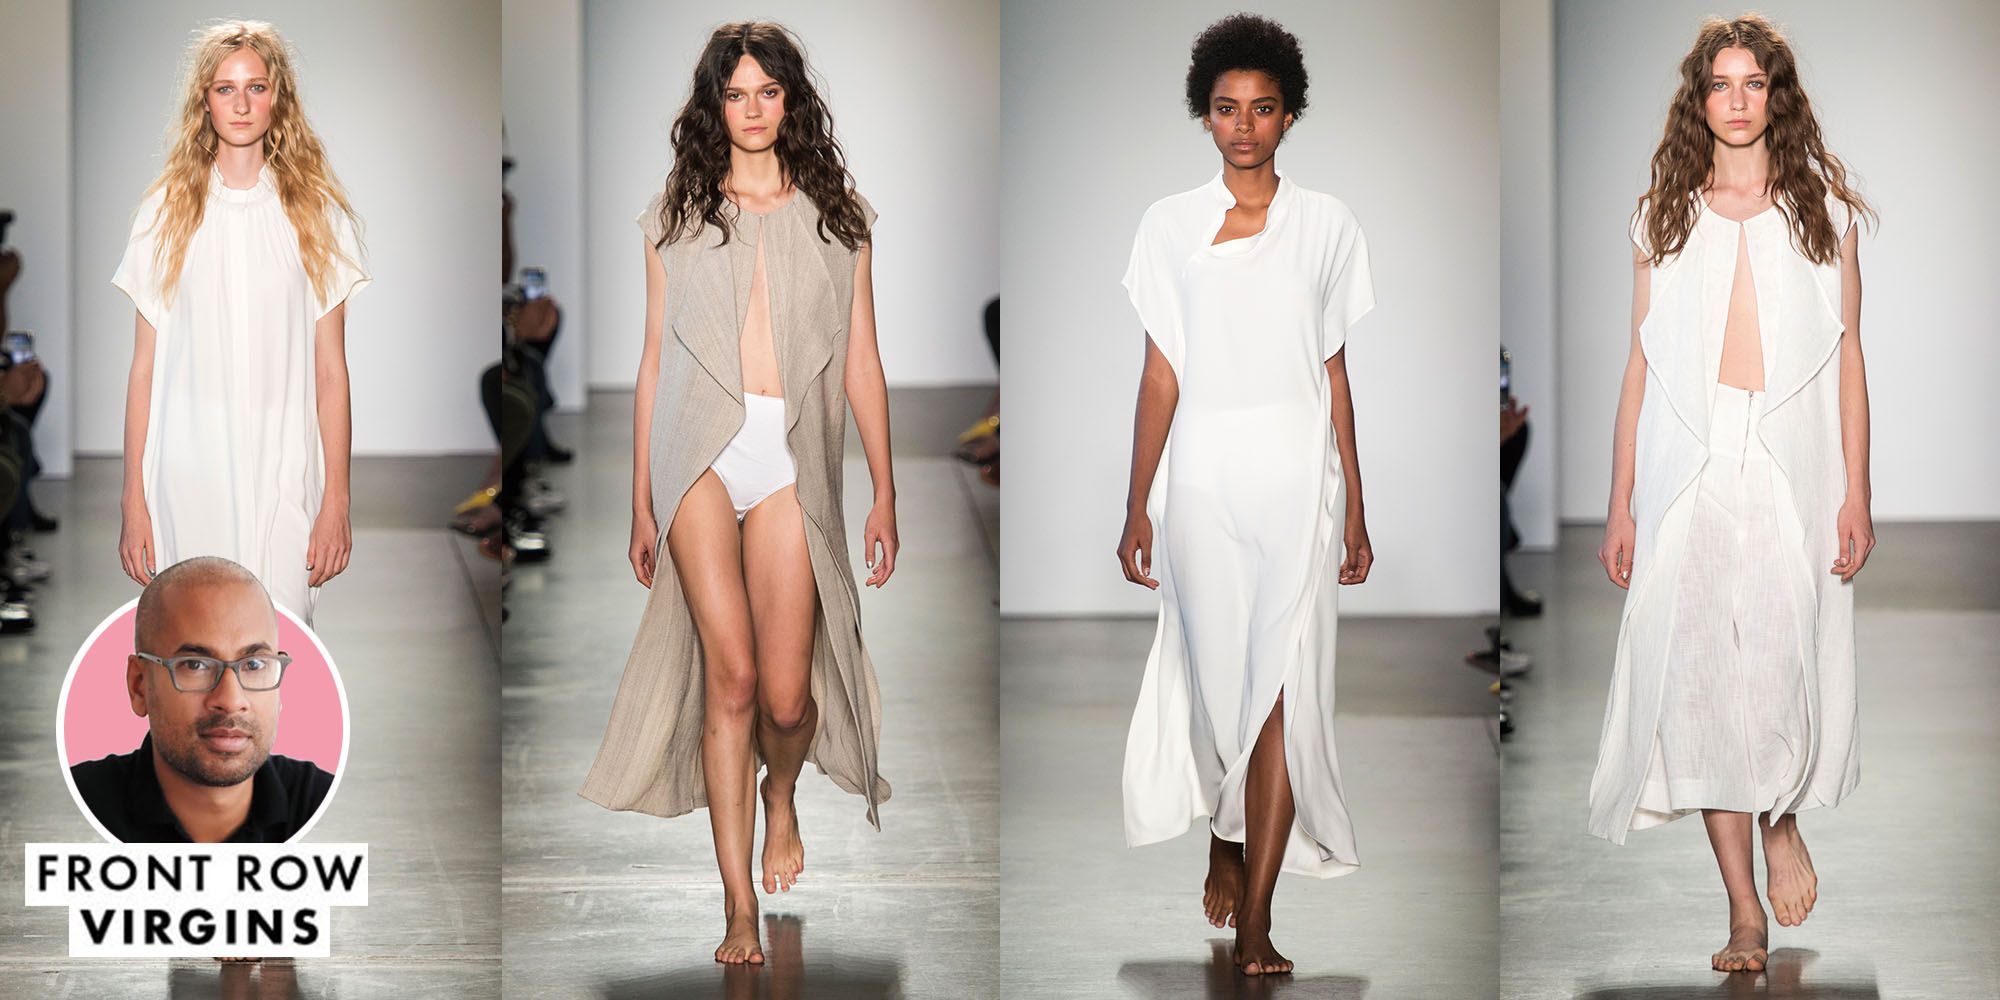 Fashion Designer Maria Cornejo Approached Her Clothing Line as an